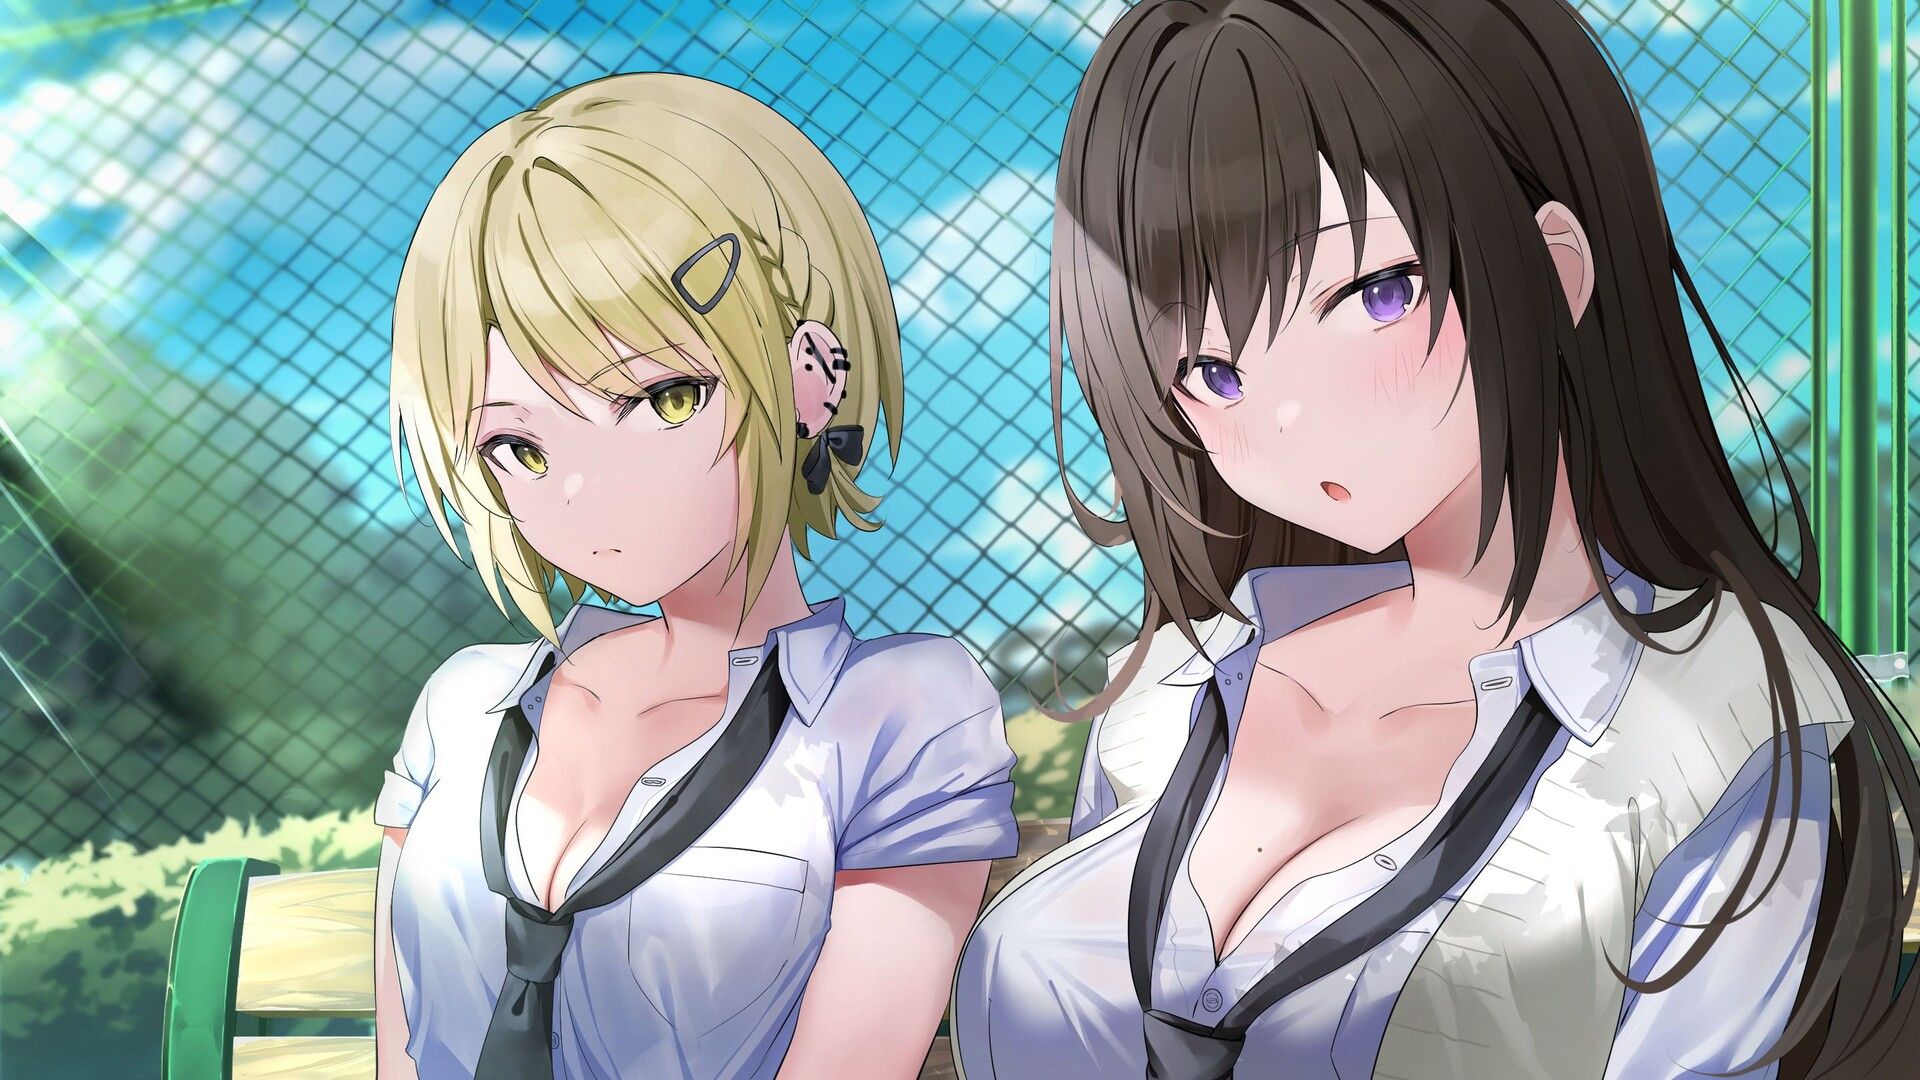 PS4 / switch version experience zero classmate erotic event CG underwear taking off that seem to be visible 3